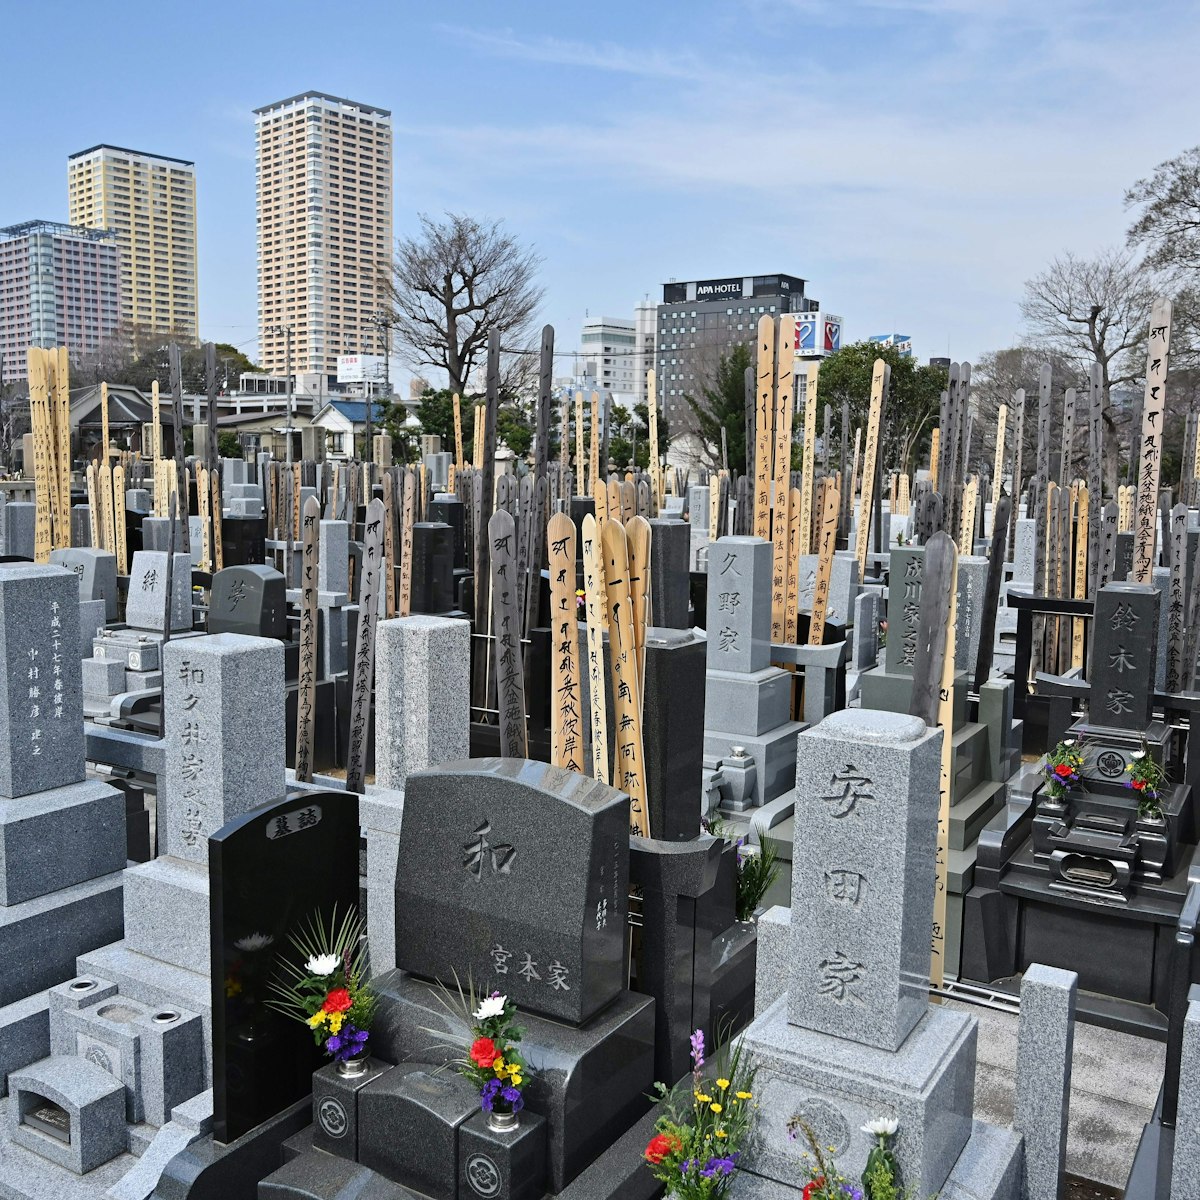 Graves are pictured in the Yanaka Cemetery in Tokyo's Taito district on March 26, 2019. (Photo by CHARLY TRIBALLEAU / AFP)        (Photo credit should read CHARLY TRIBALLEAU/AFP via Getty Images)
1132871321
lifestyle, Horizontal